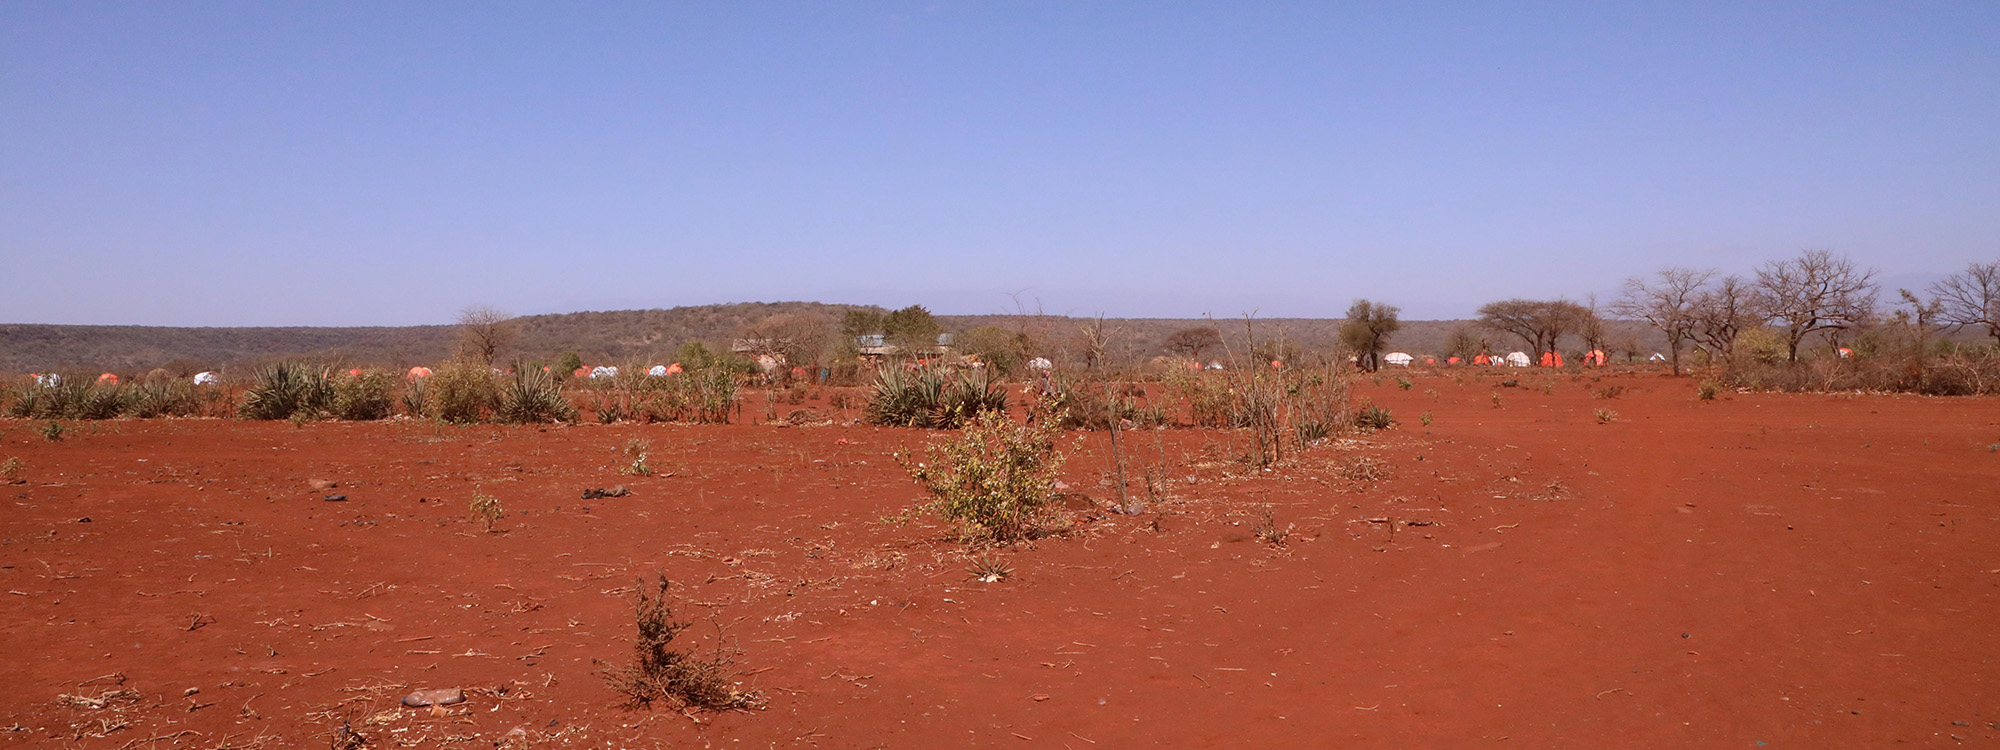 Dry landscape in Ehtiopia, which has experienced drought due to the climate crisis